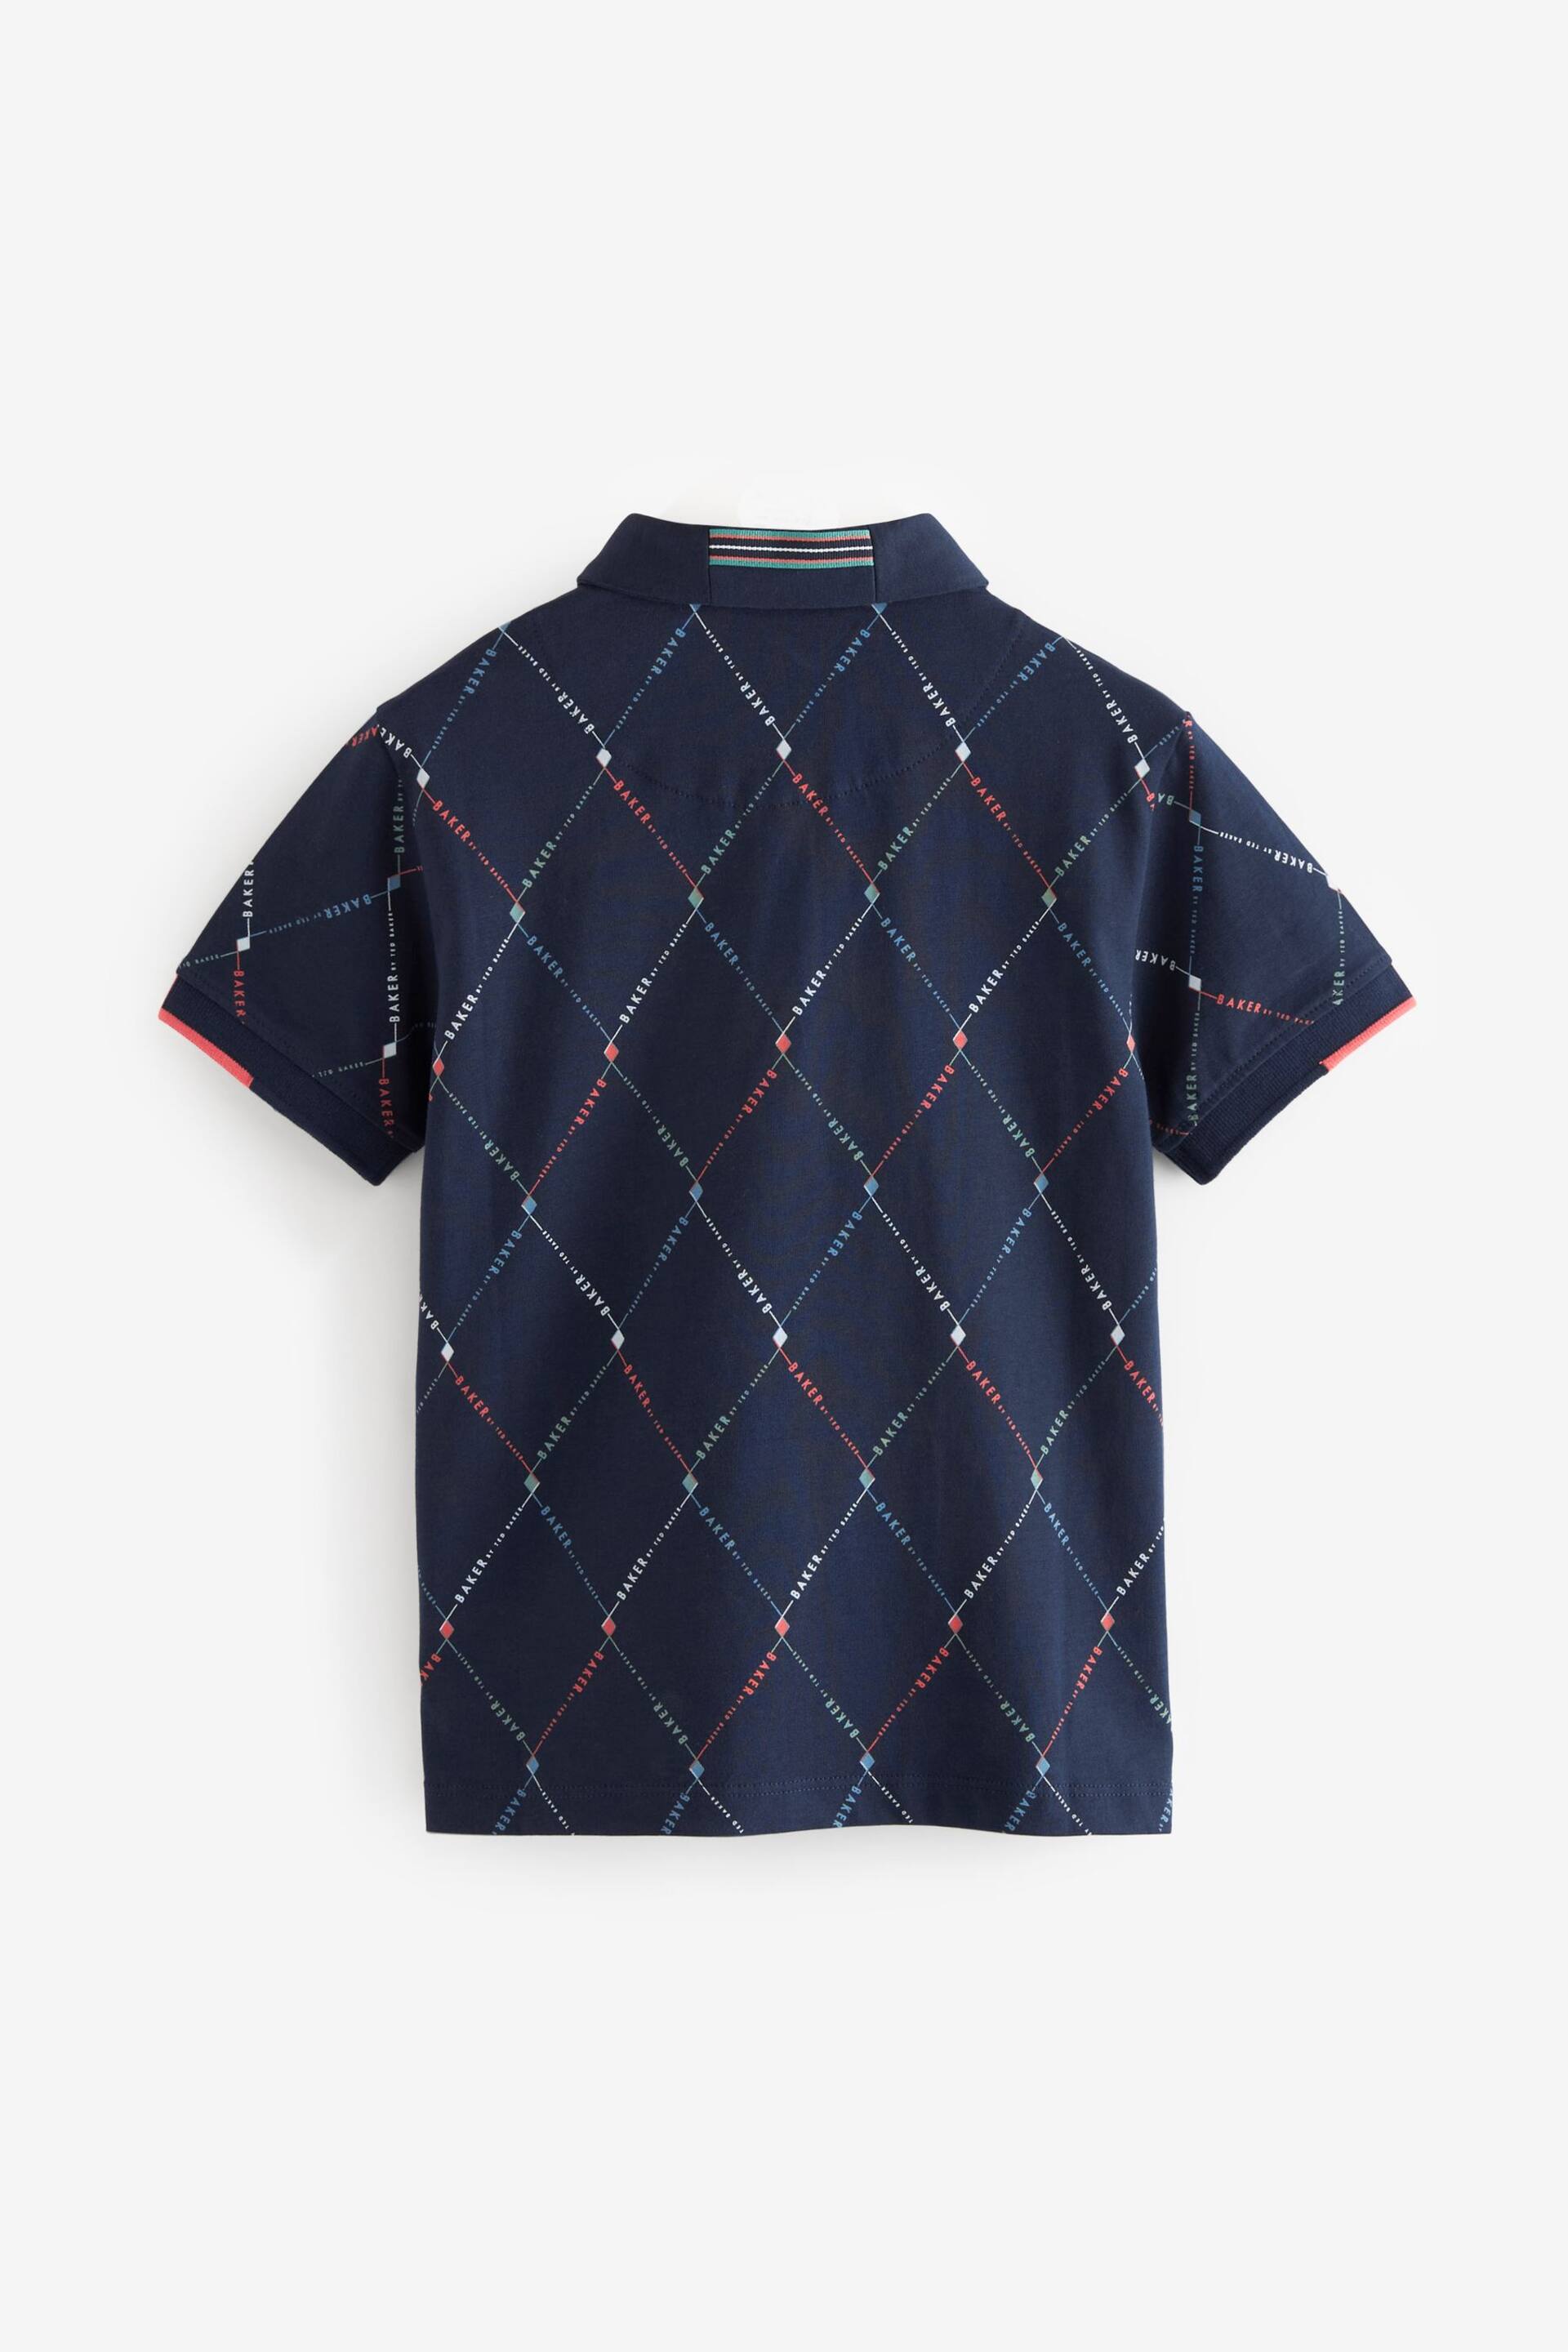 Baker by Ted Baker Printed Polo Shirt - Image 8 of 10